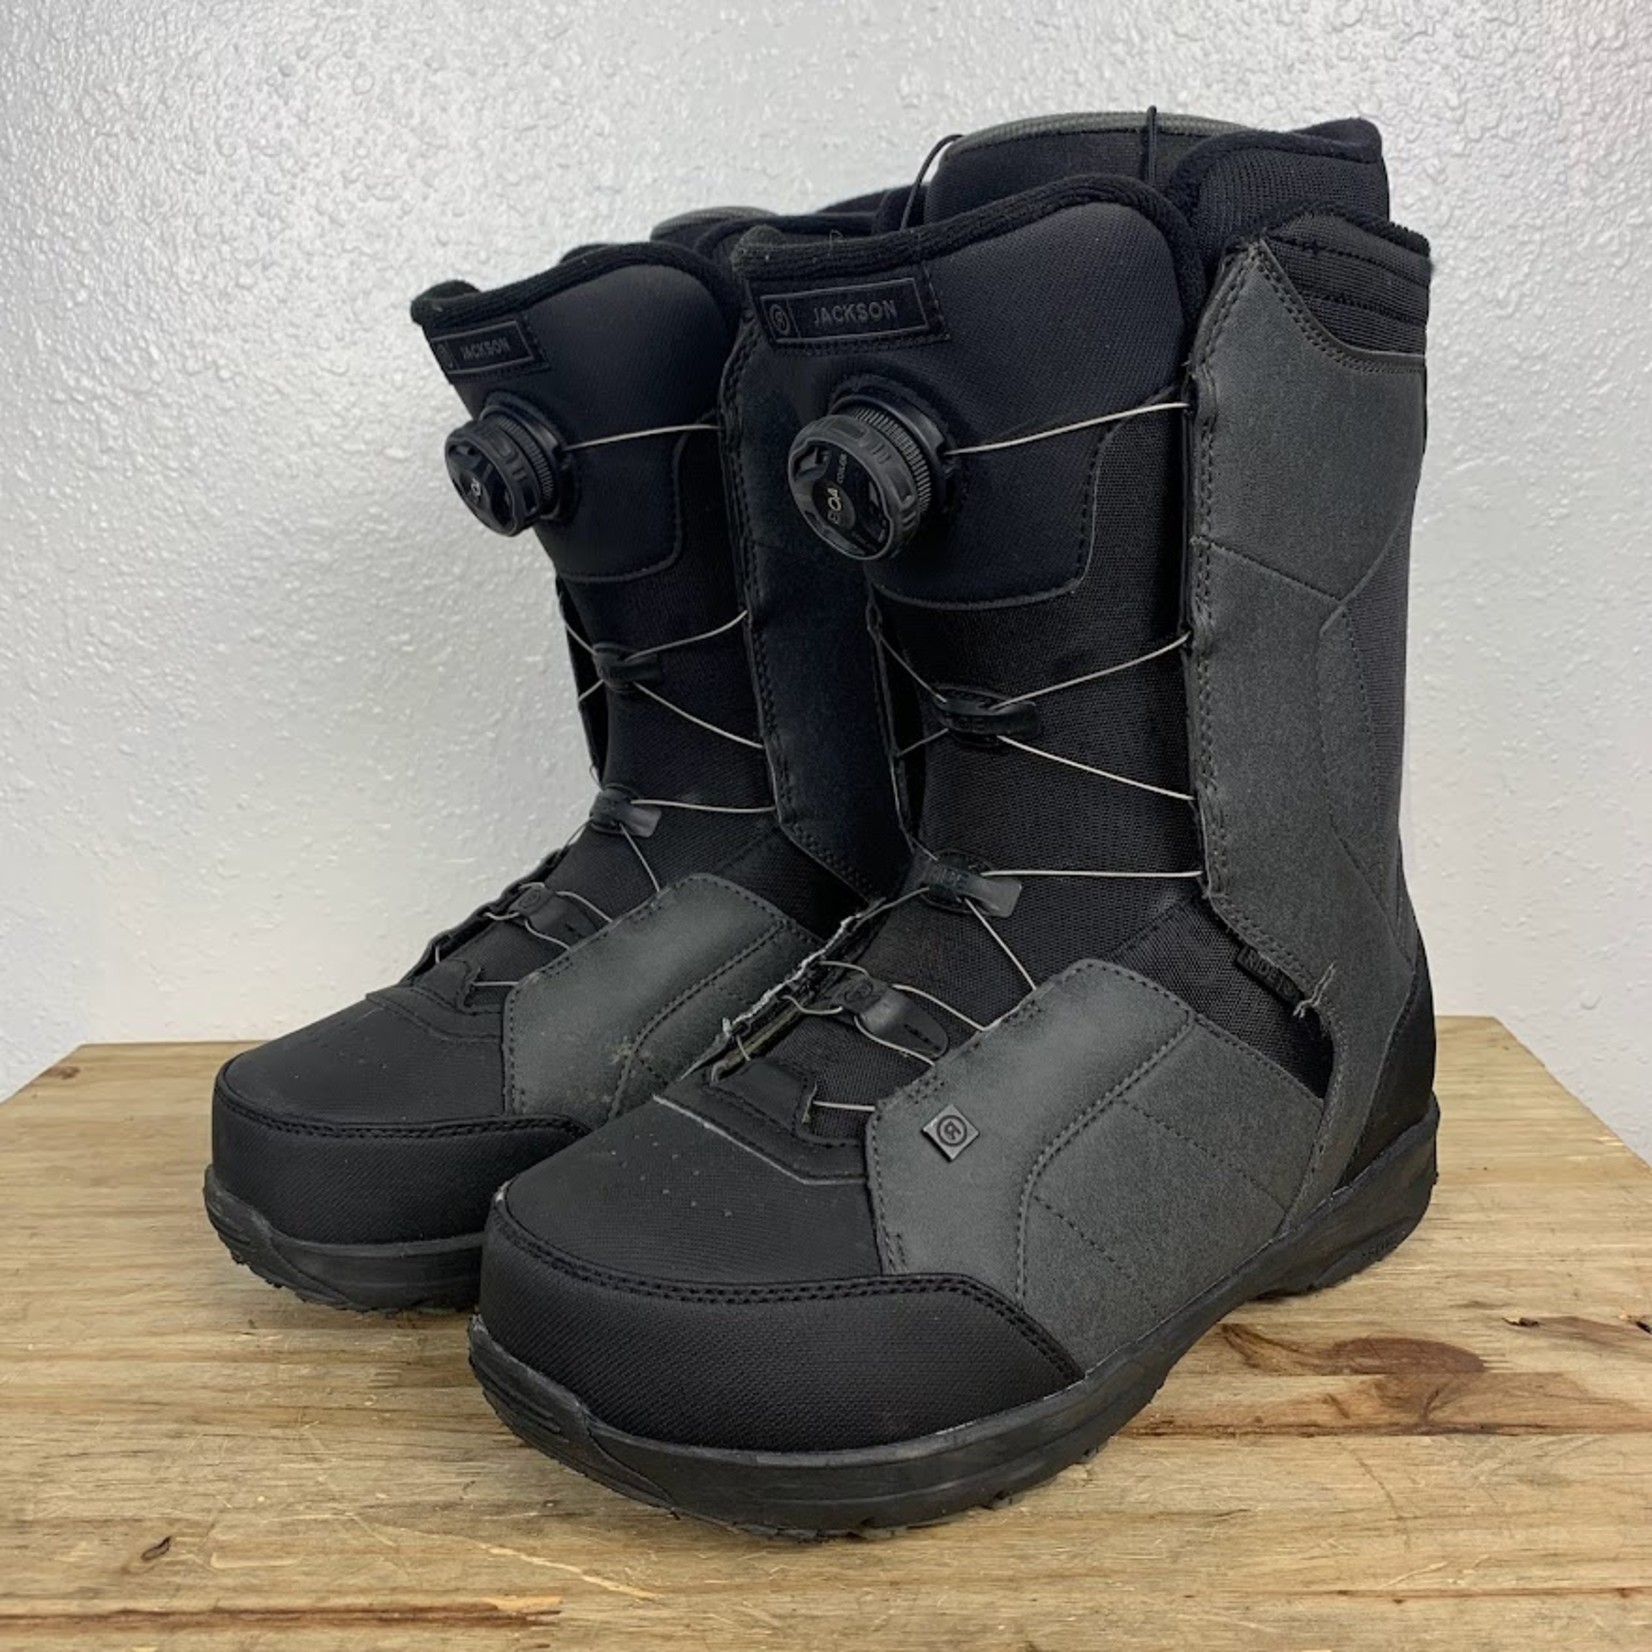 Ride Jackson Snowboard Boots, Size 10.5 MENS